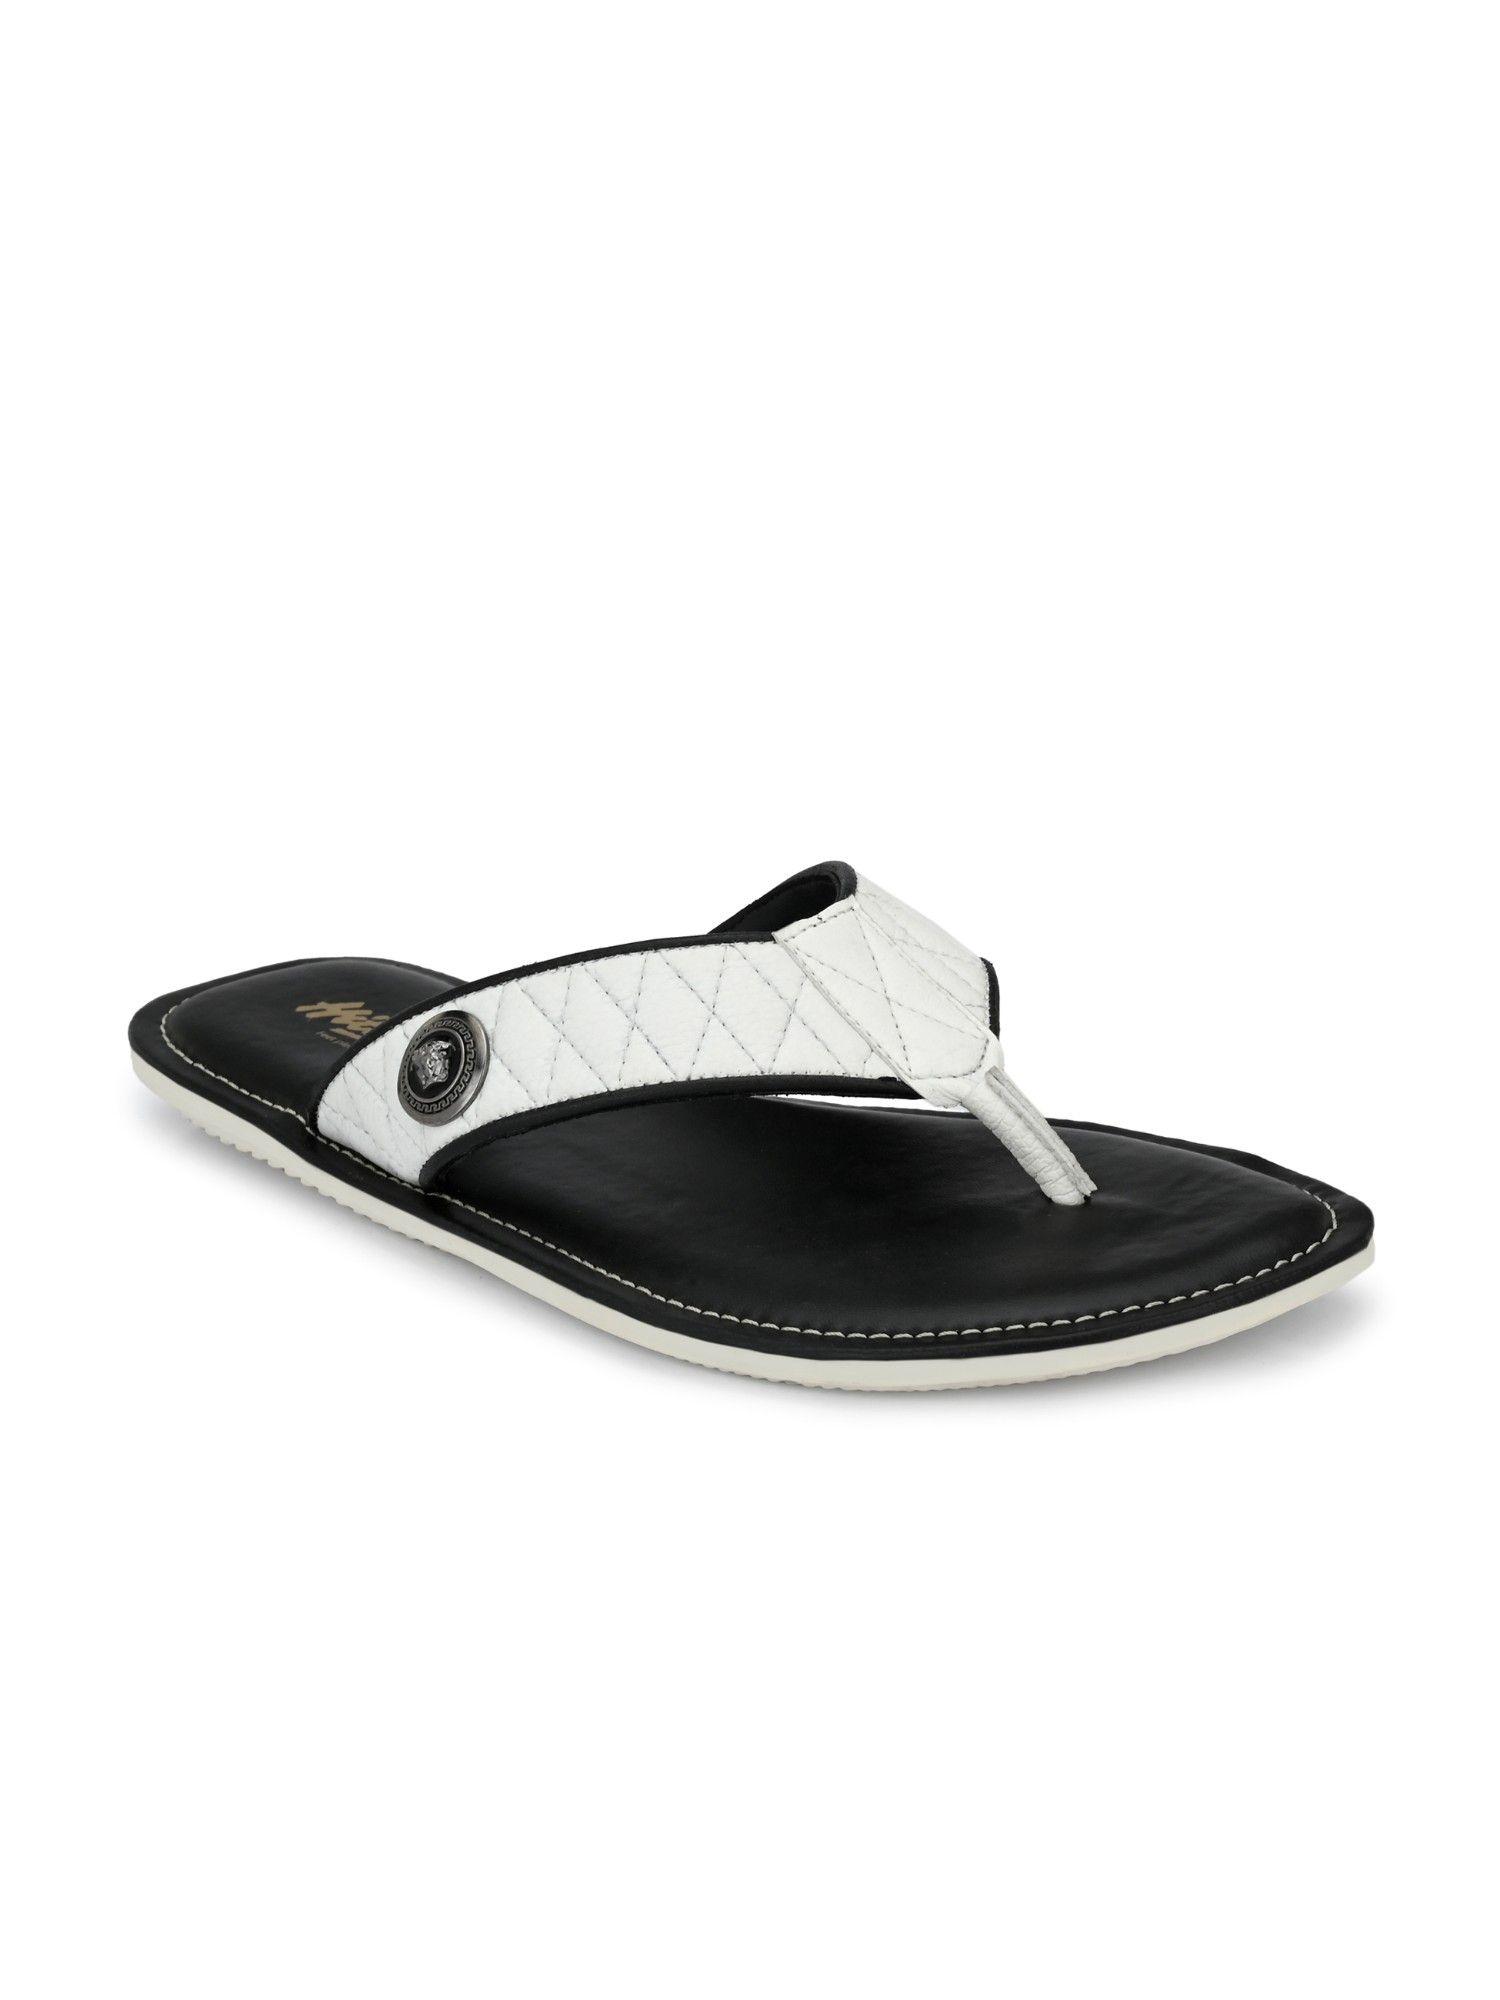 men's white leather casual open toe indoor outdoor slippers